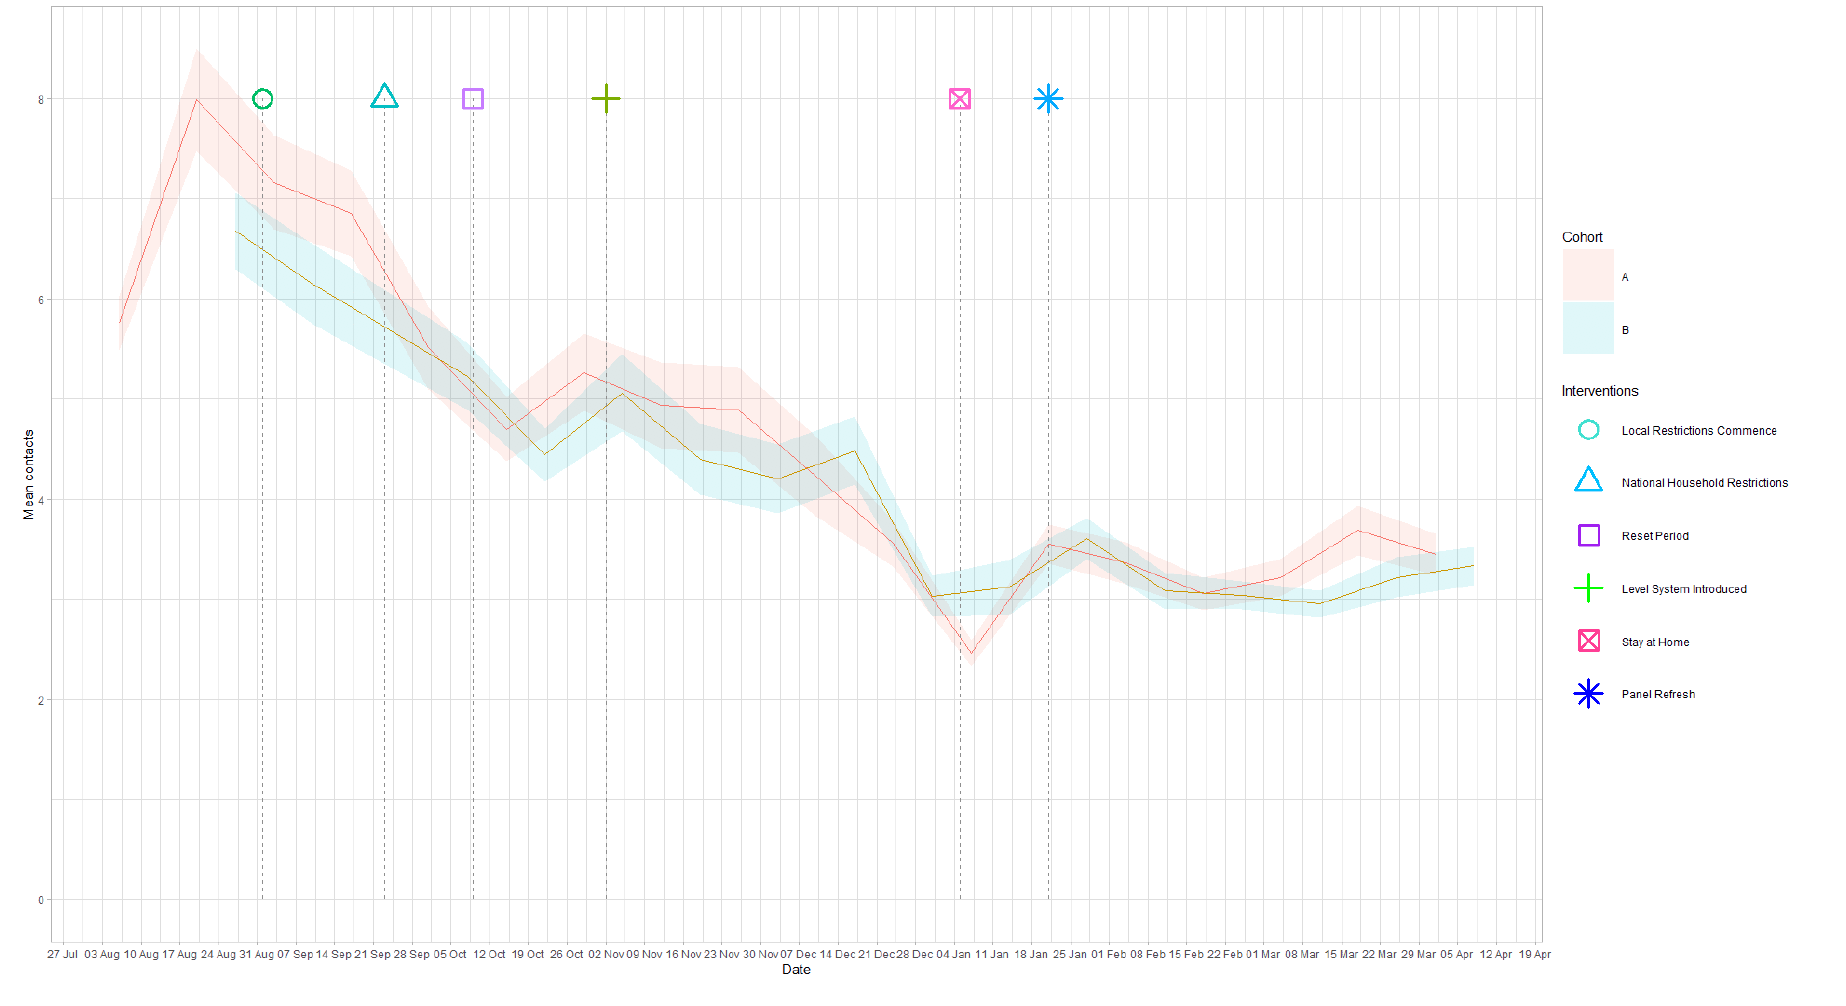 A line graph showing mean adult contacts by age group for panel A and panel B in the work setting from 6 Aug to 14 Apr.